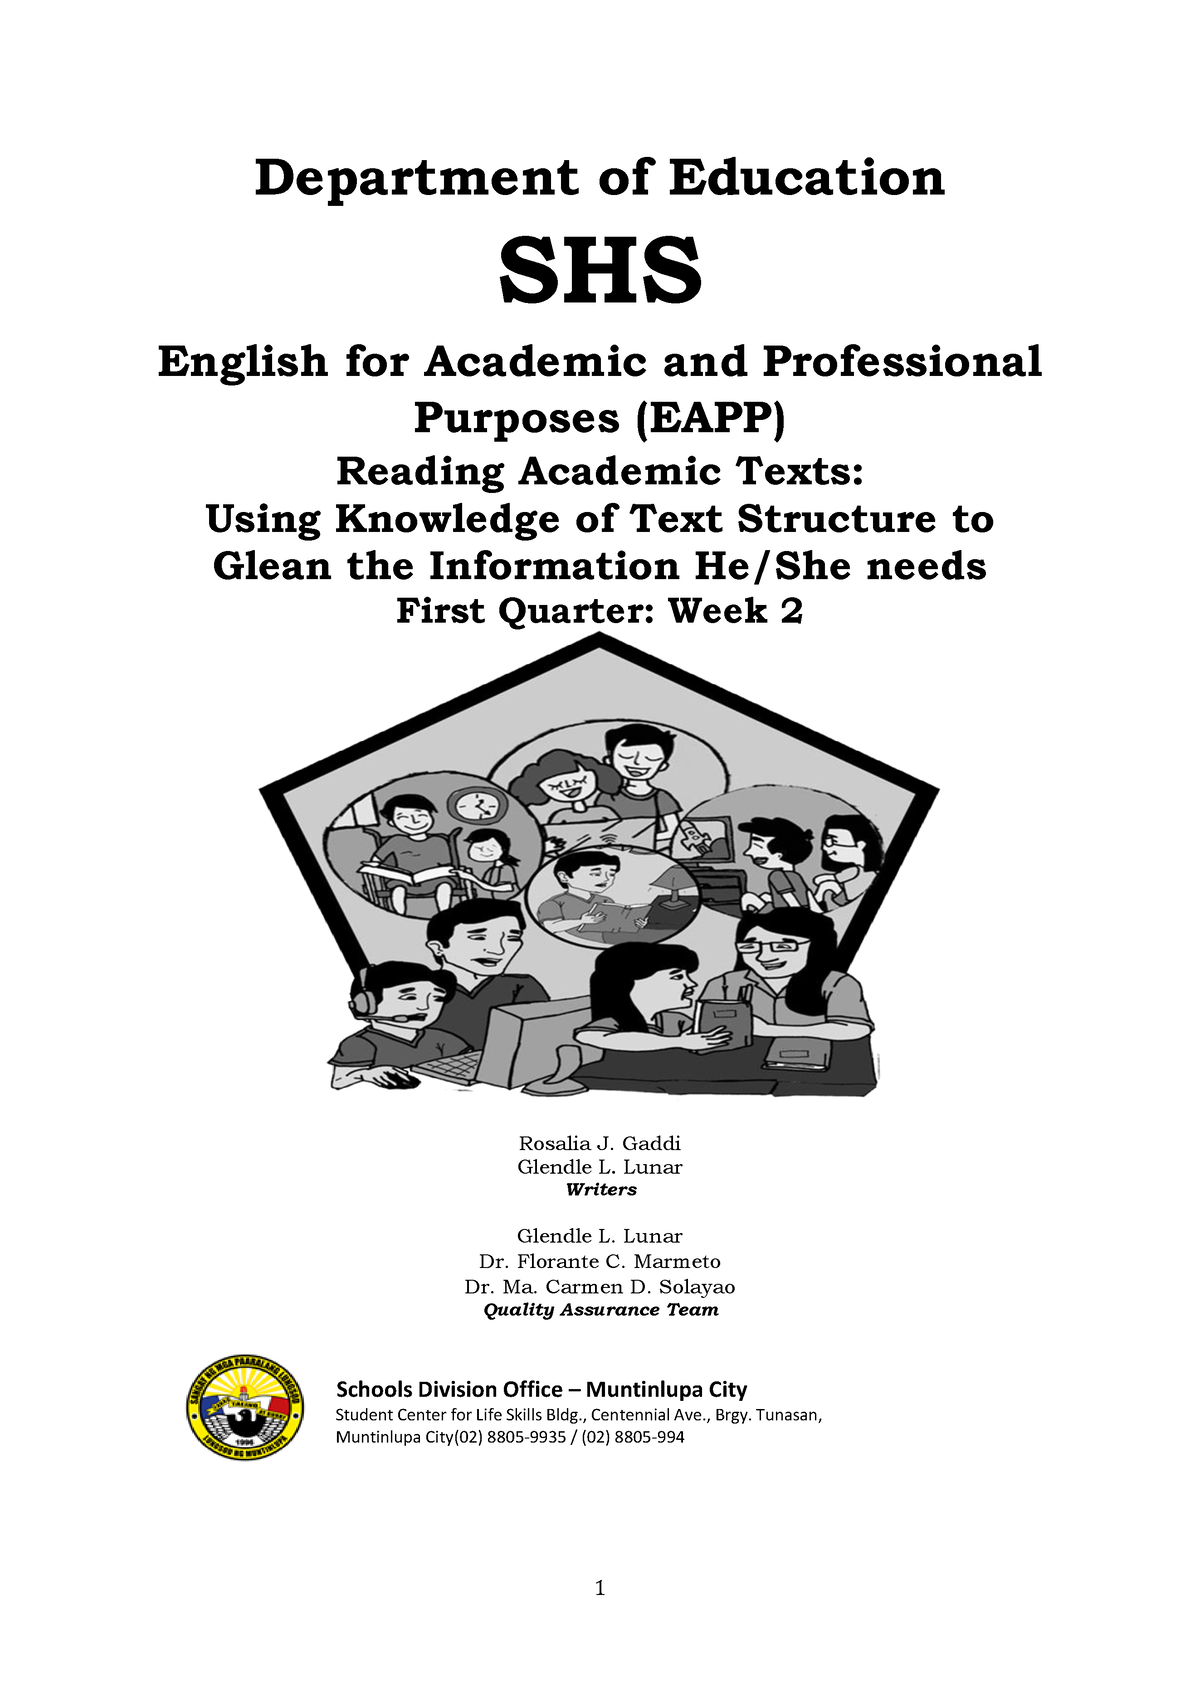 Eapp Slem Q1 W2 English Eapp Department Of Education Shs English For Academic And 2924